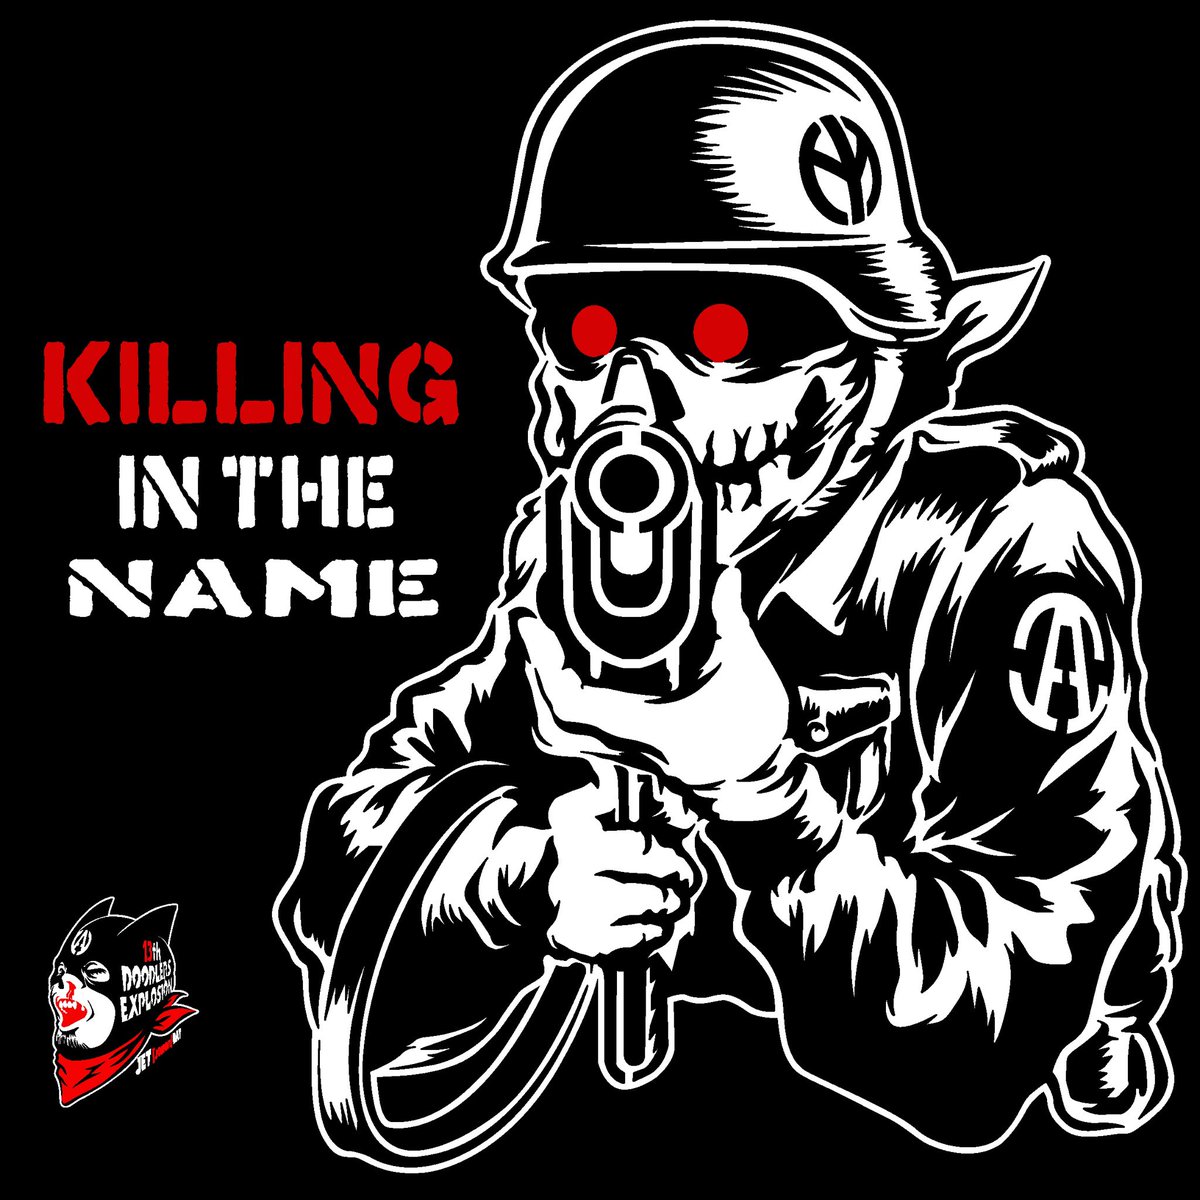 “ Killing in the Name'
by13th Doodlers Explosion

#artwork #drawing #illustration #lowbrow #stencil